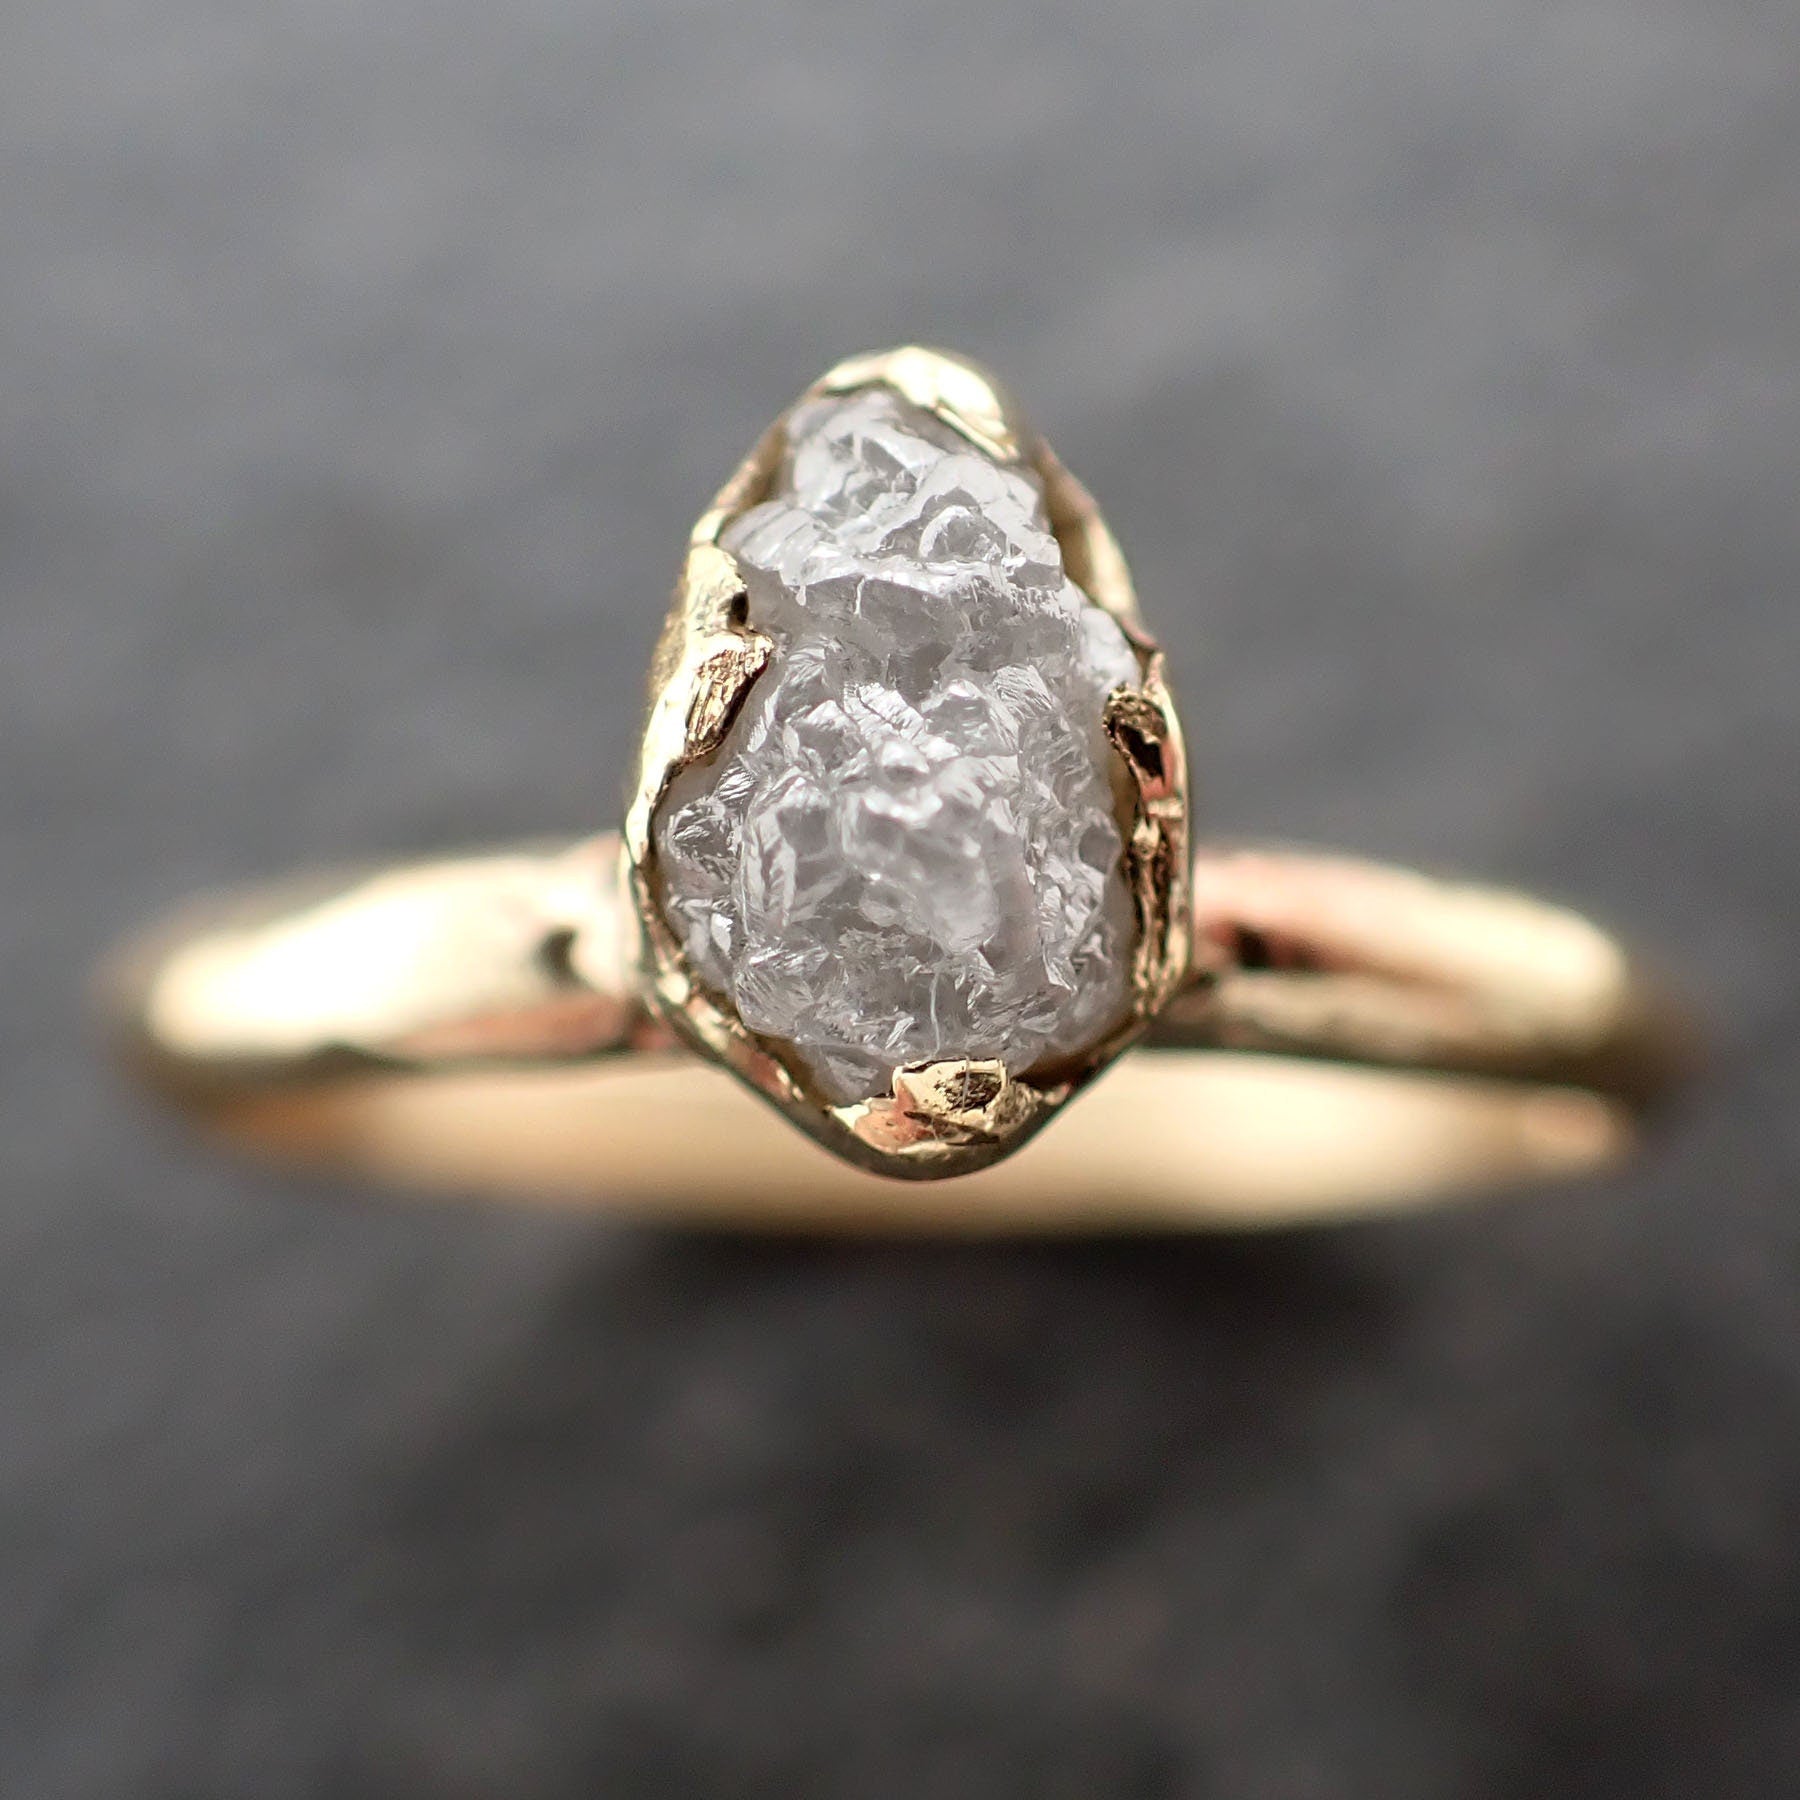 Raw Diamond Engagement Ring Rough Uncut Diamond Solitaire Recycled 14k yellow gold Conflict Free Diamond Wedding Promise 3118